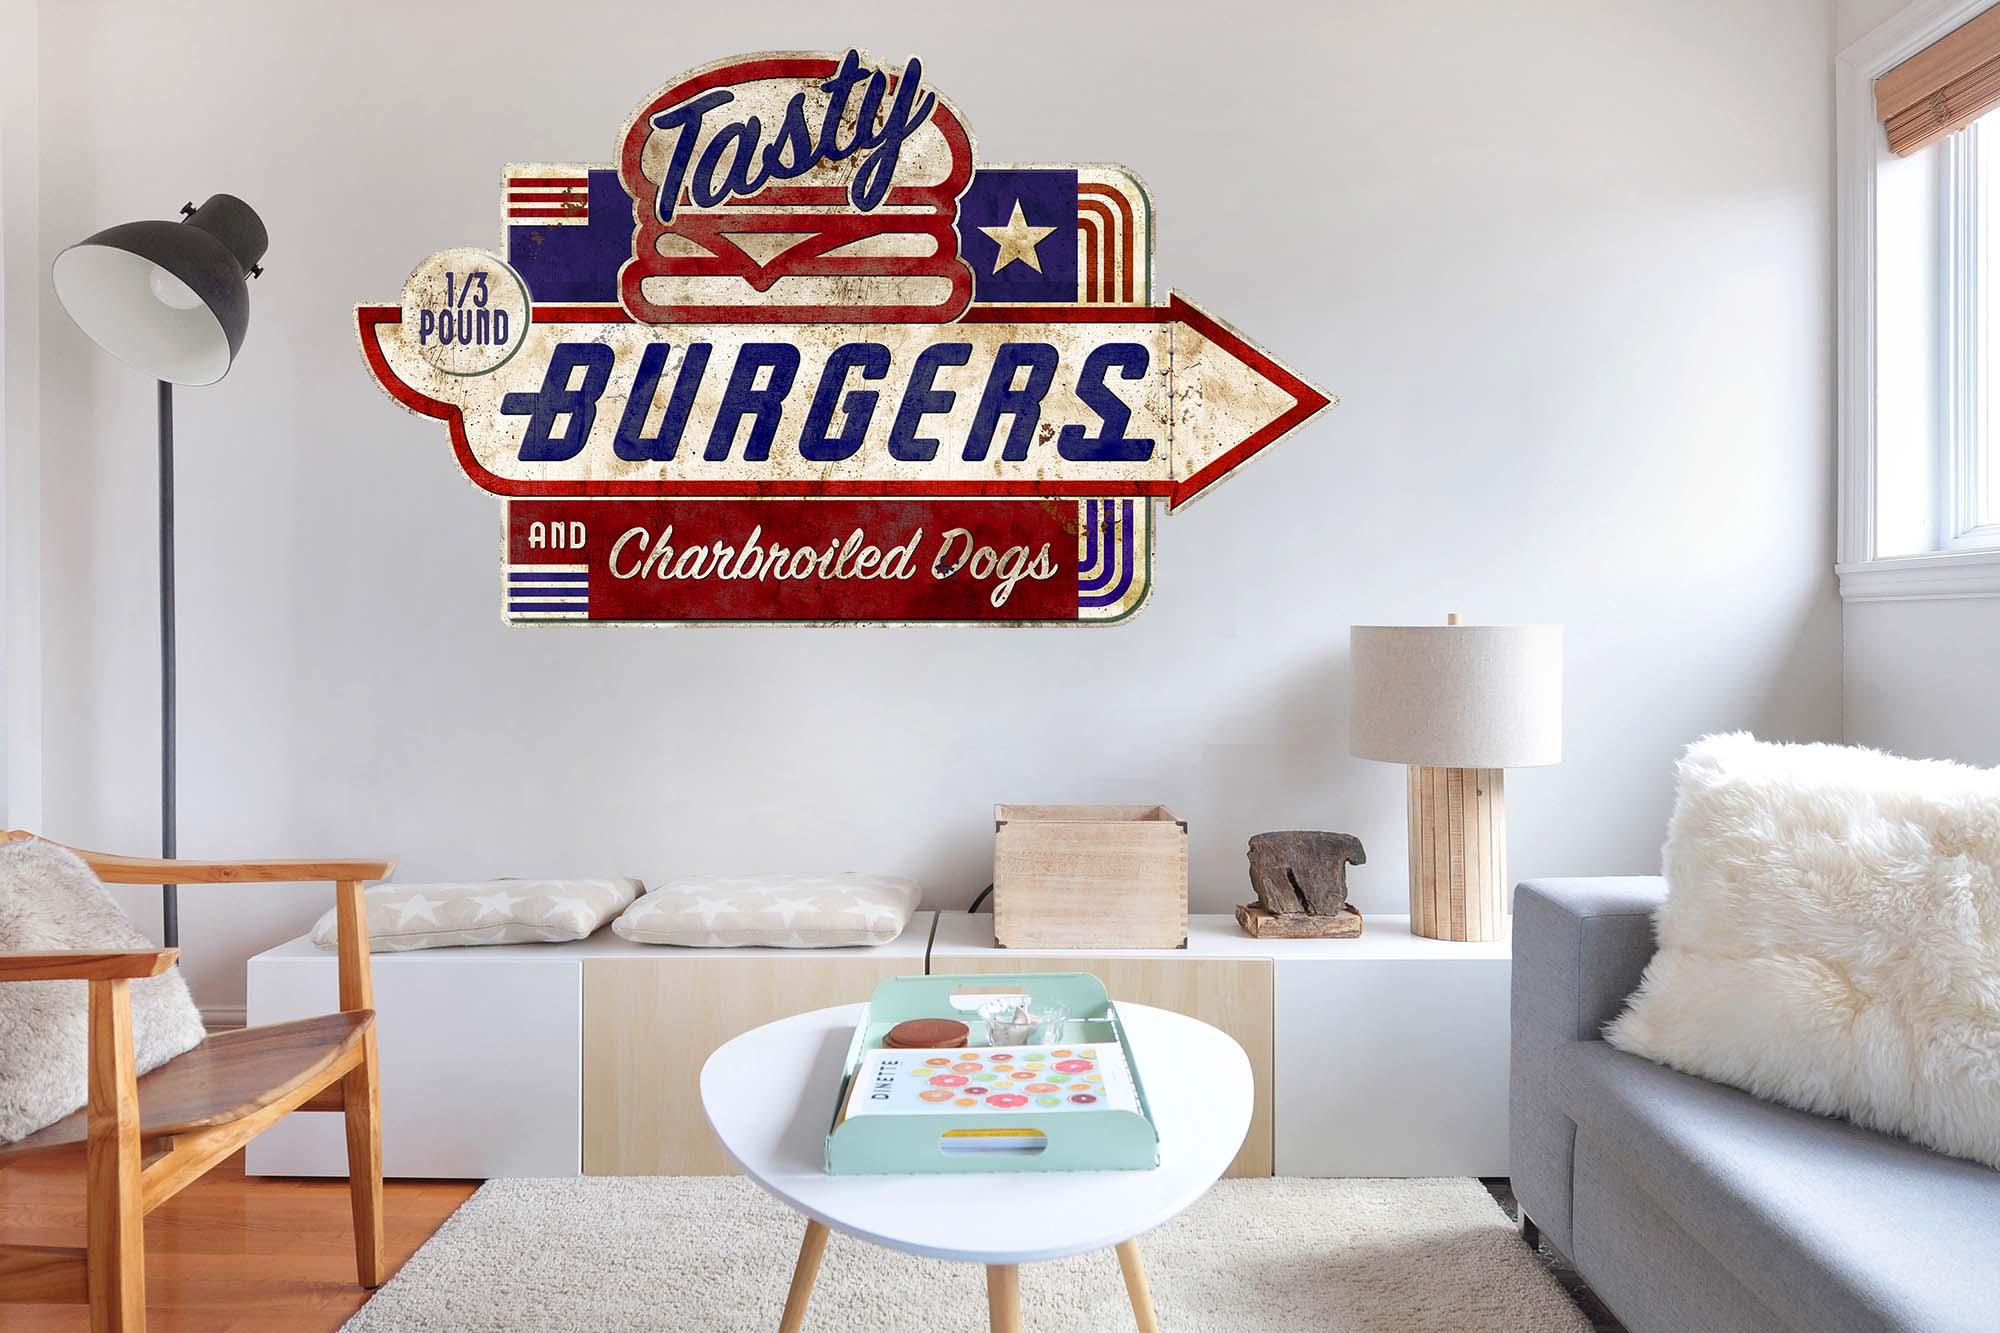 CoolWalls.ca DieCut Tasty Burgers Vintage Sign Decal, Wall Decal, Peel-N-Stick and Removes Easily Anytime